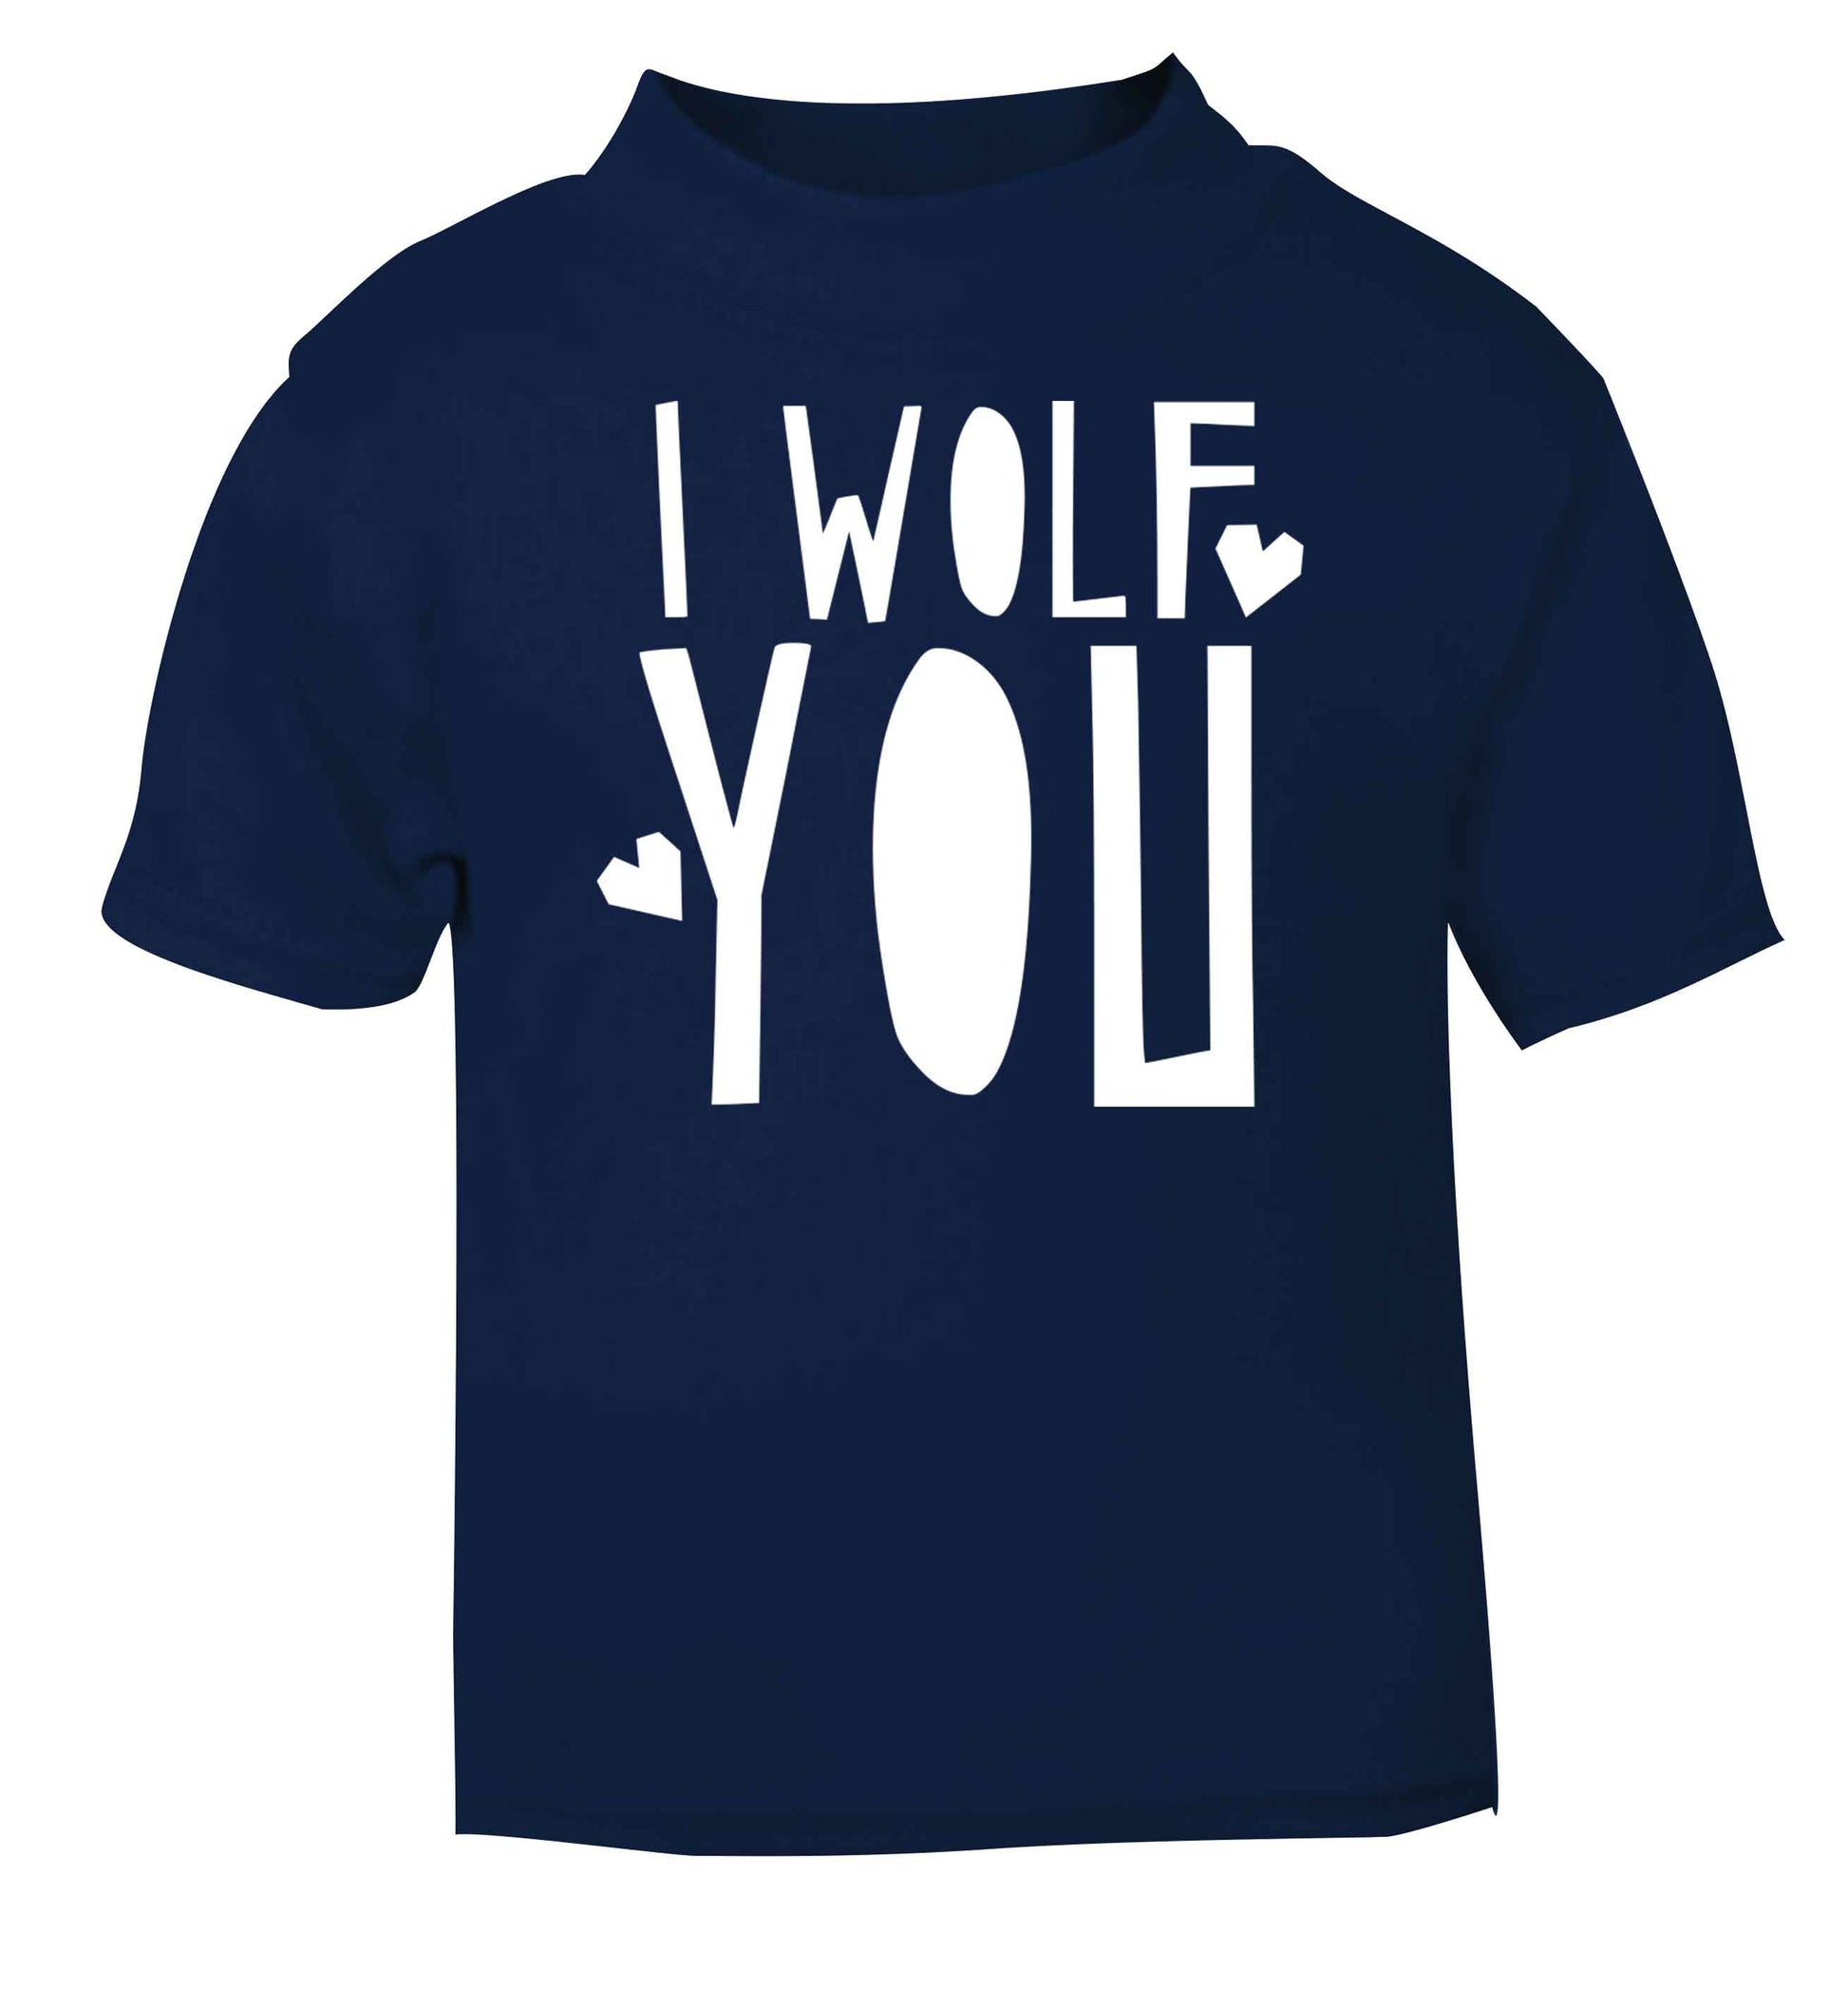 I wolf you navy baby toddler Tshirt 2 Years